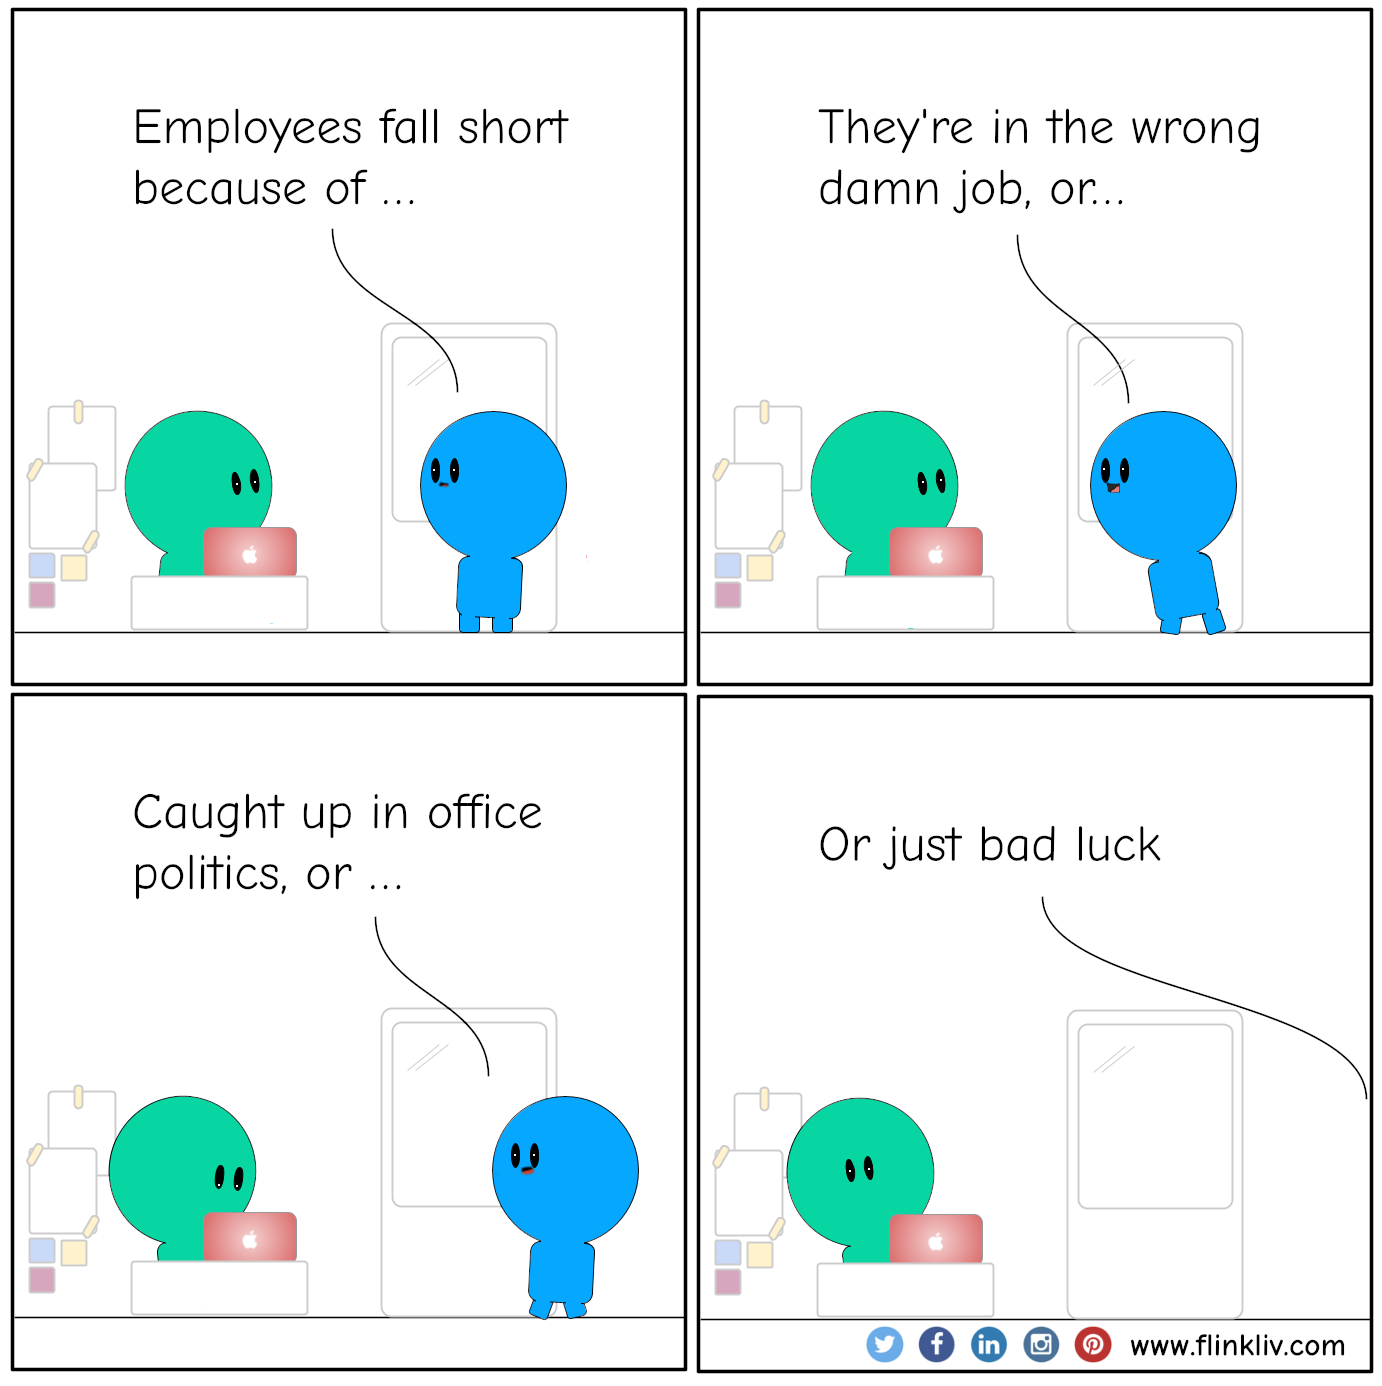 Conversation between A and B about why employees fall short.
				B: Employees fall short 'cause:
				B: They're in the wrong damn job
				B: Caught up in office politics
				B: or just bad luck.
			